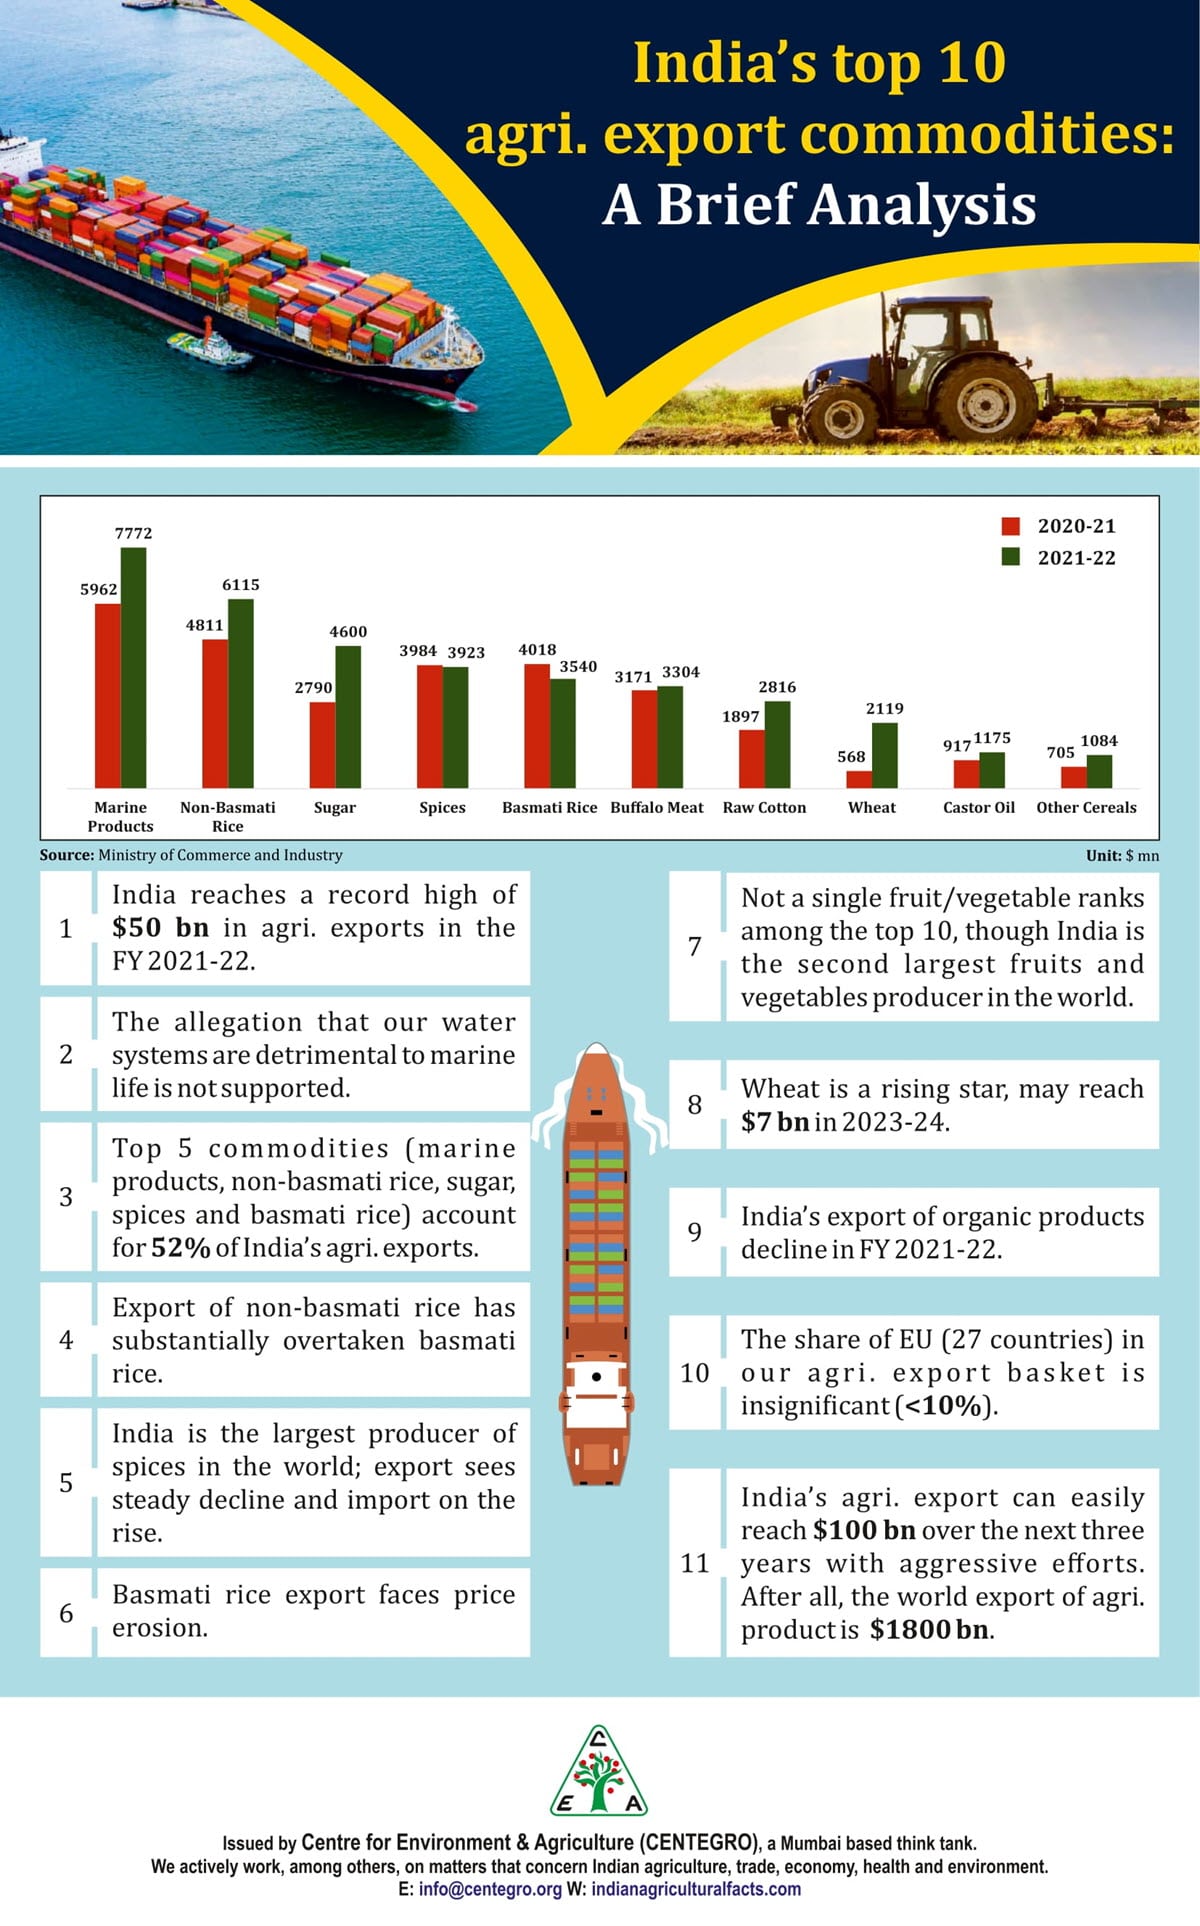 Indias top 10 agriculture export commodities Infographic